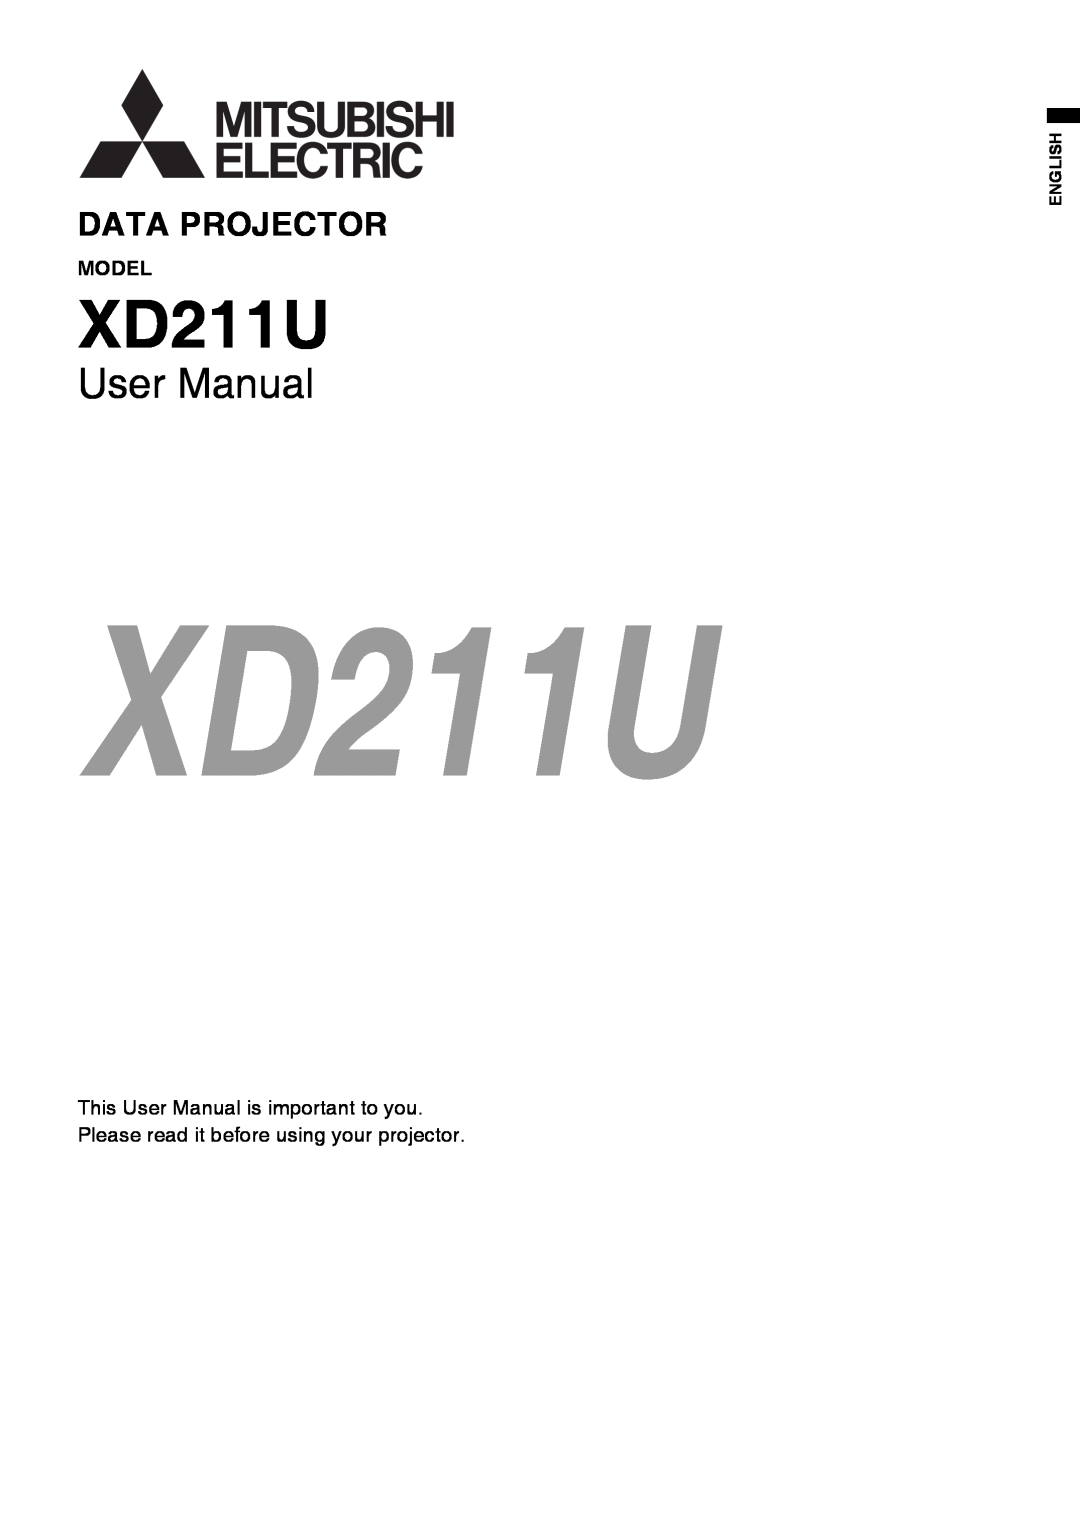 Mitsubishi Electronics XD211U user manual Model, This User Manual is important to you, English, Data Projector 